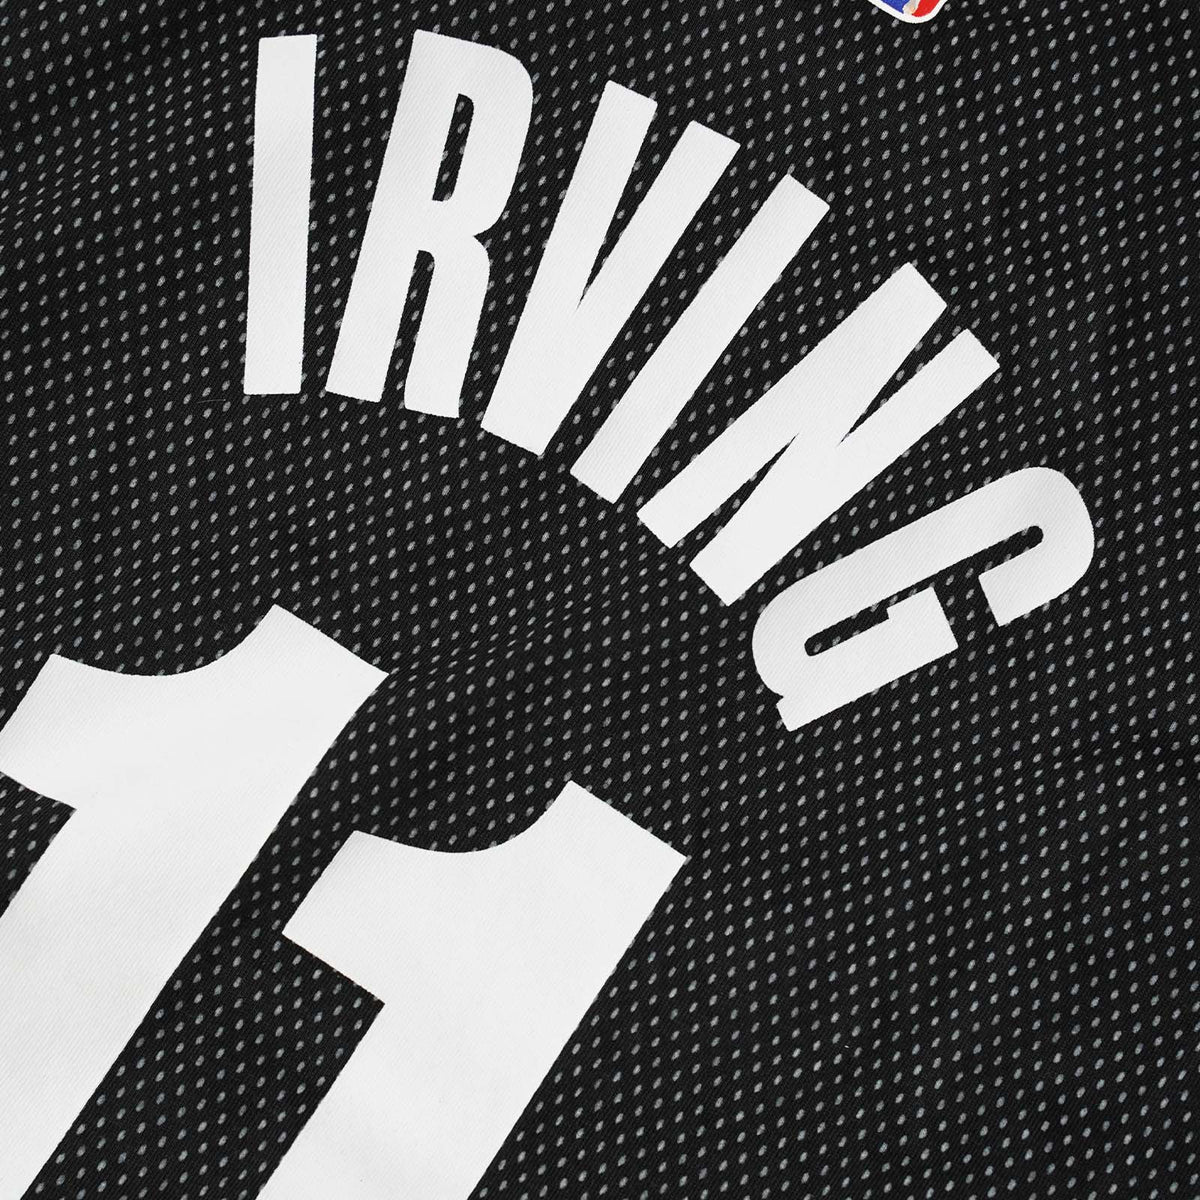 Kyrie Irving Brooklyn Nets Name &amp; Number Rookie Of The Year NBA T-Shirt - Black